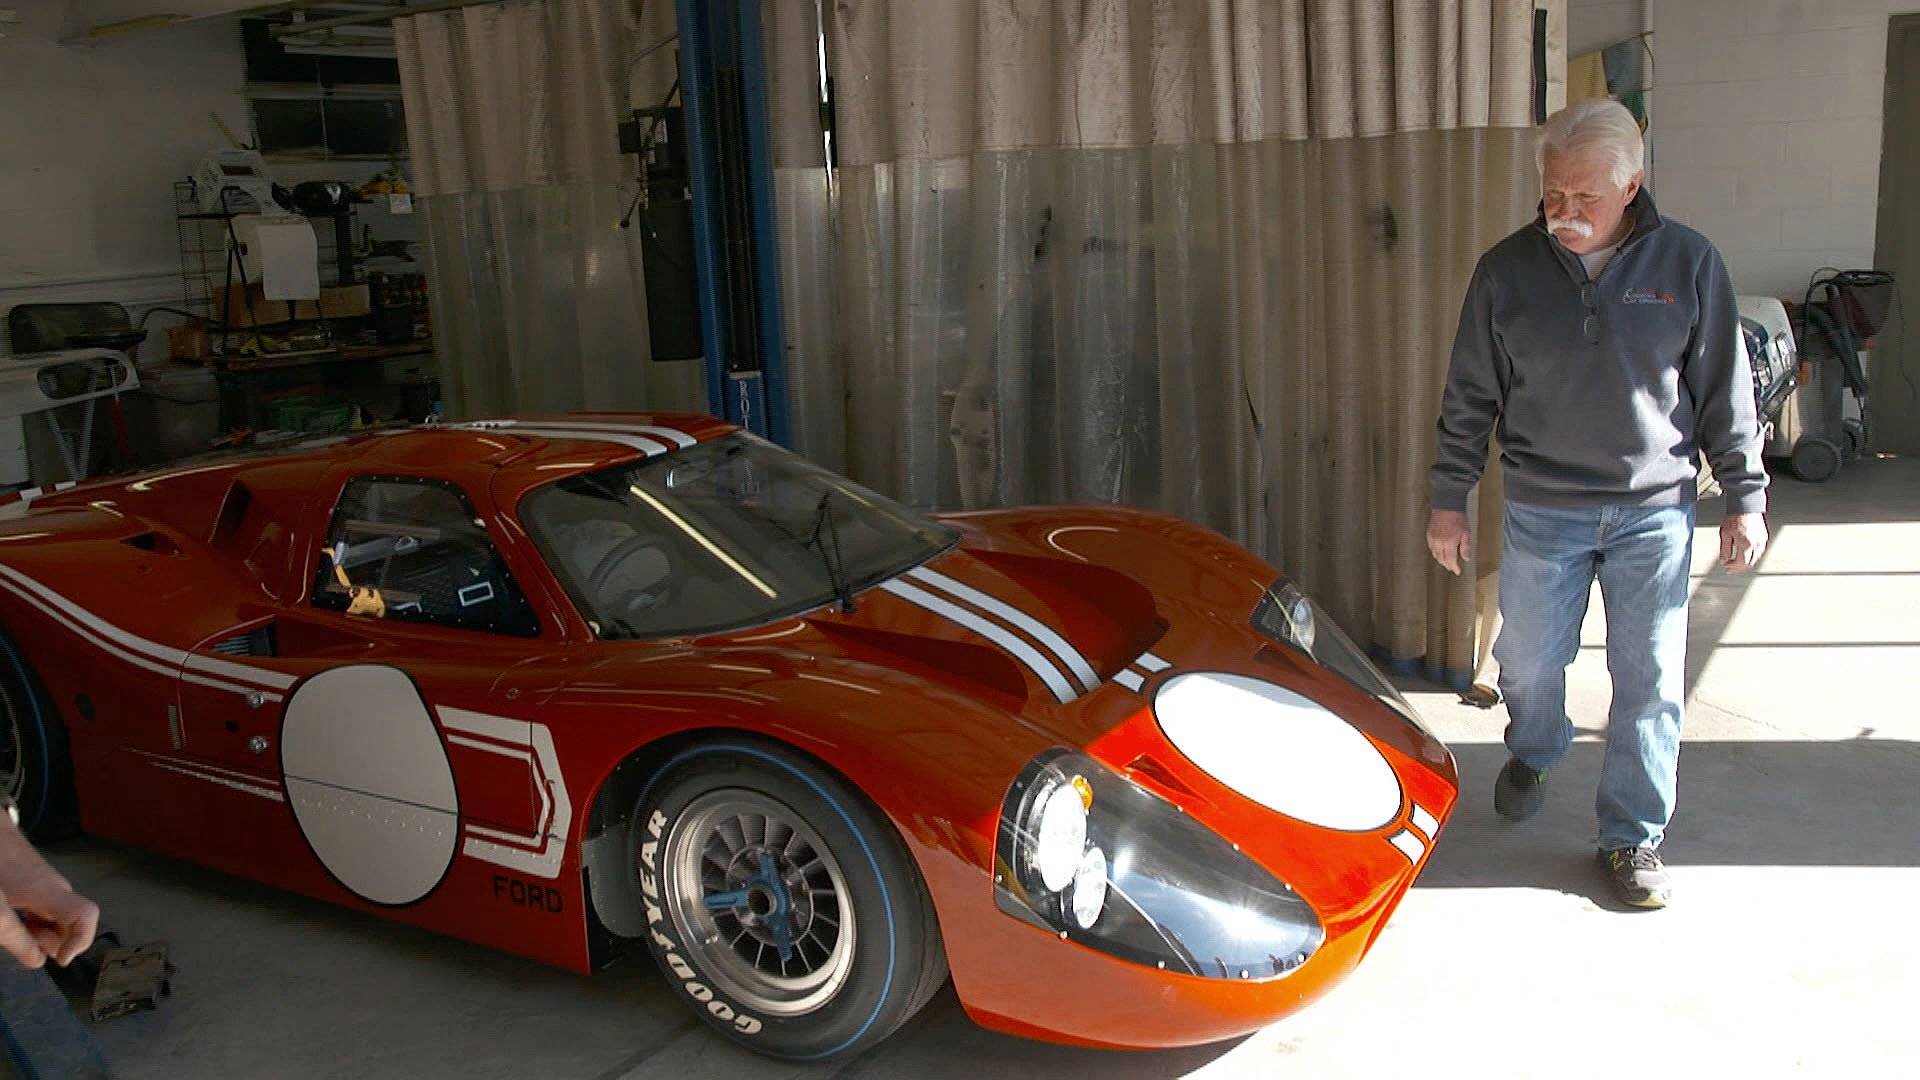 Chasing Classic Cars: 13, Episode 6 - Ford GT40 & A Flying Banana